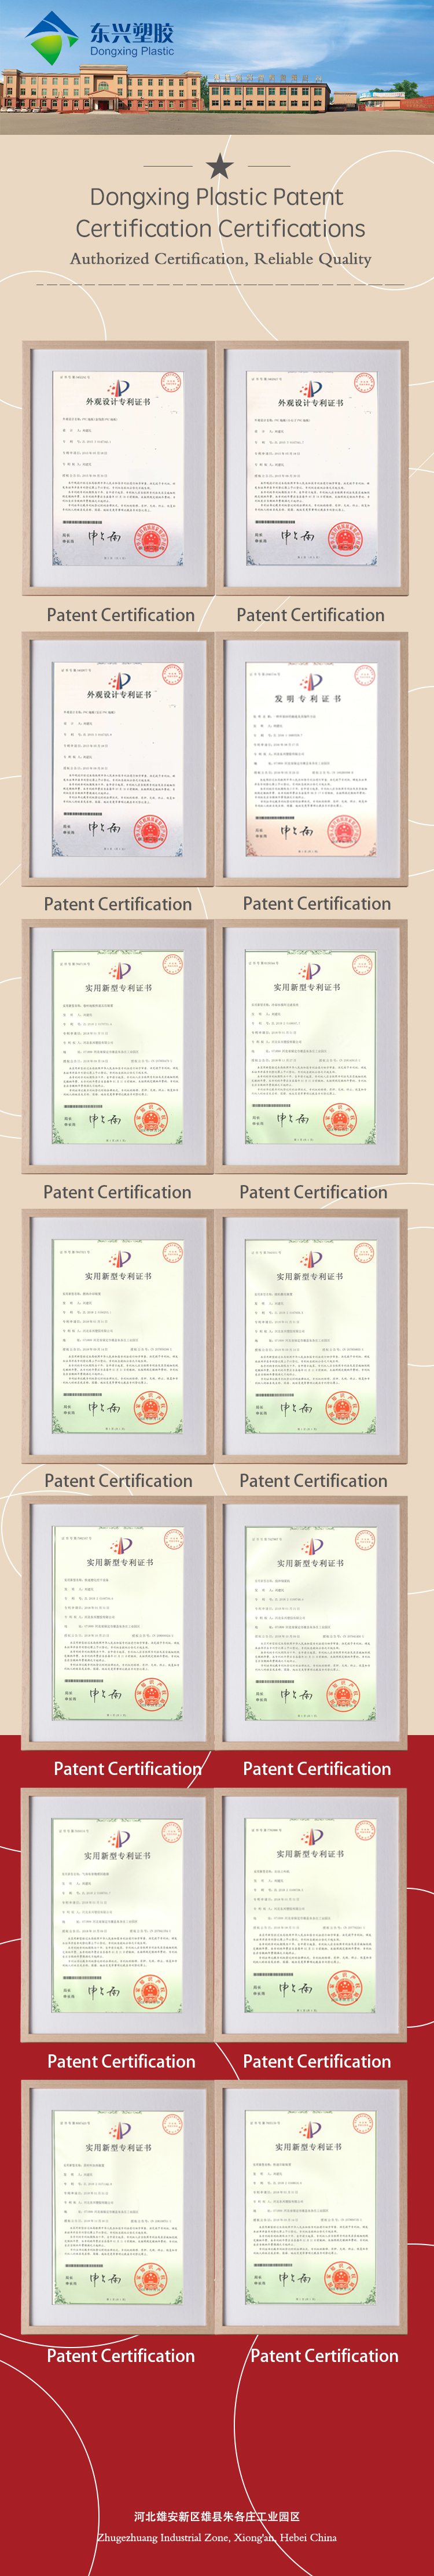 dongxing patent certificate